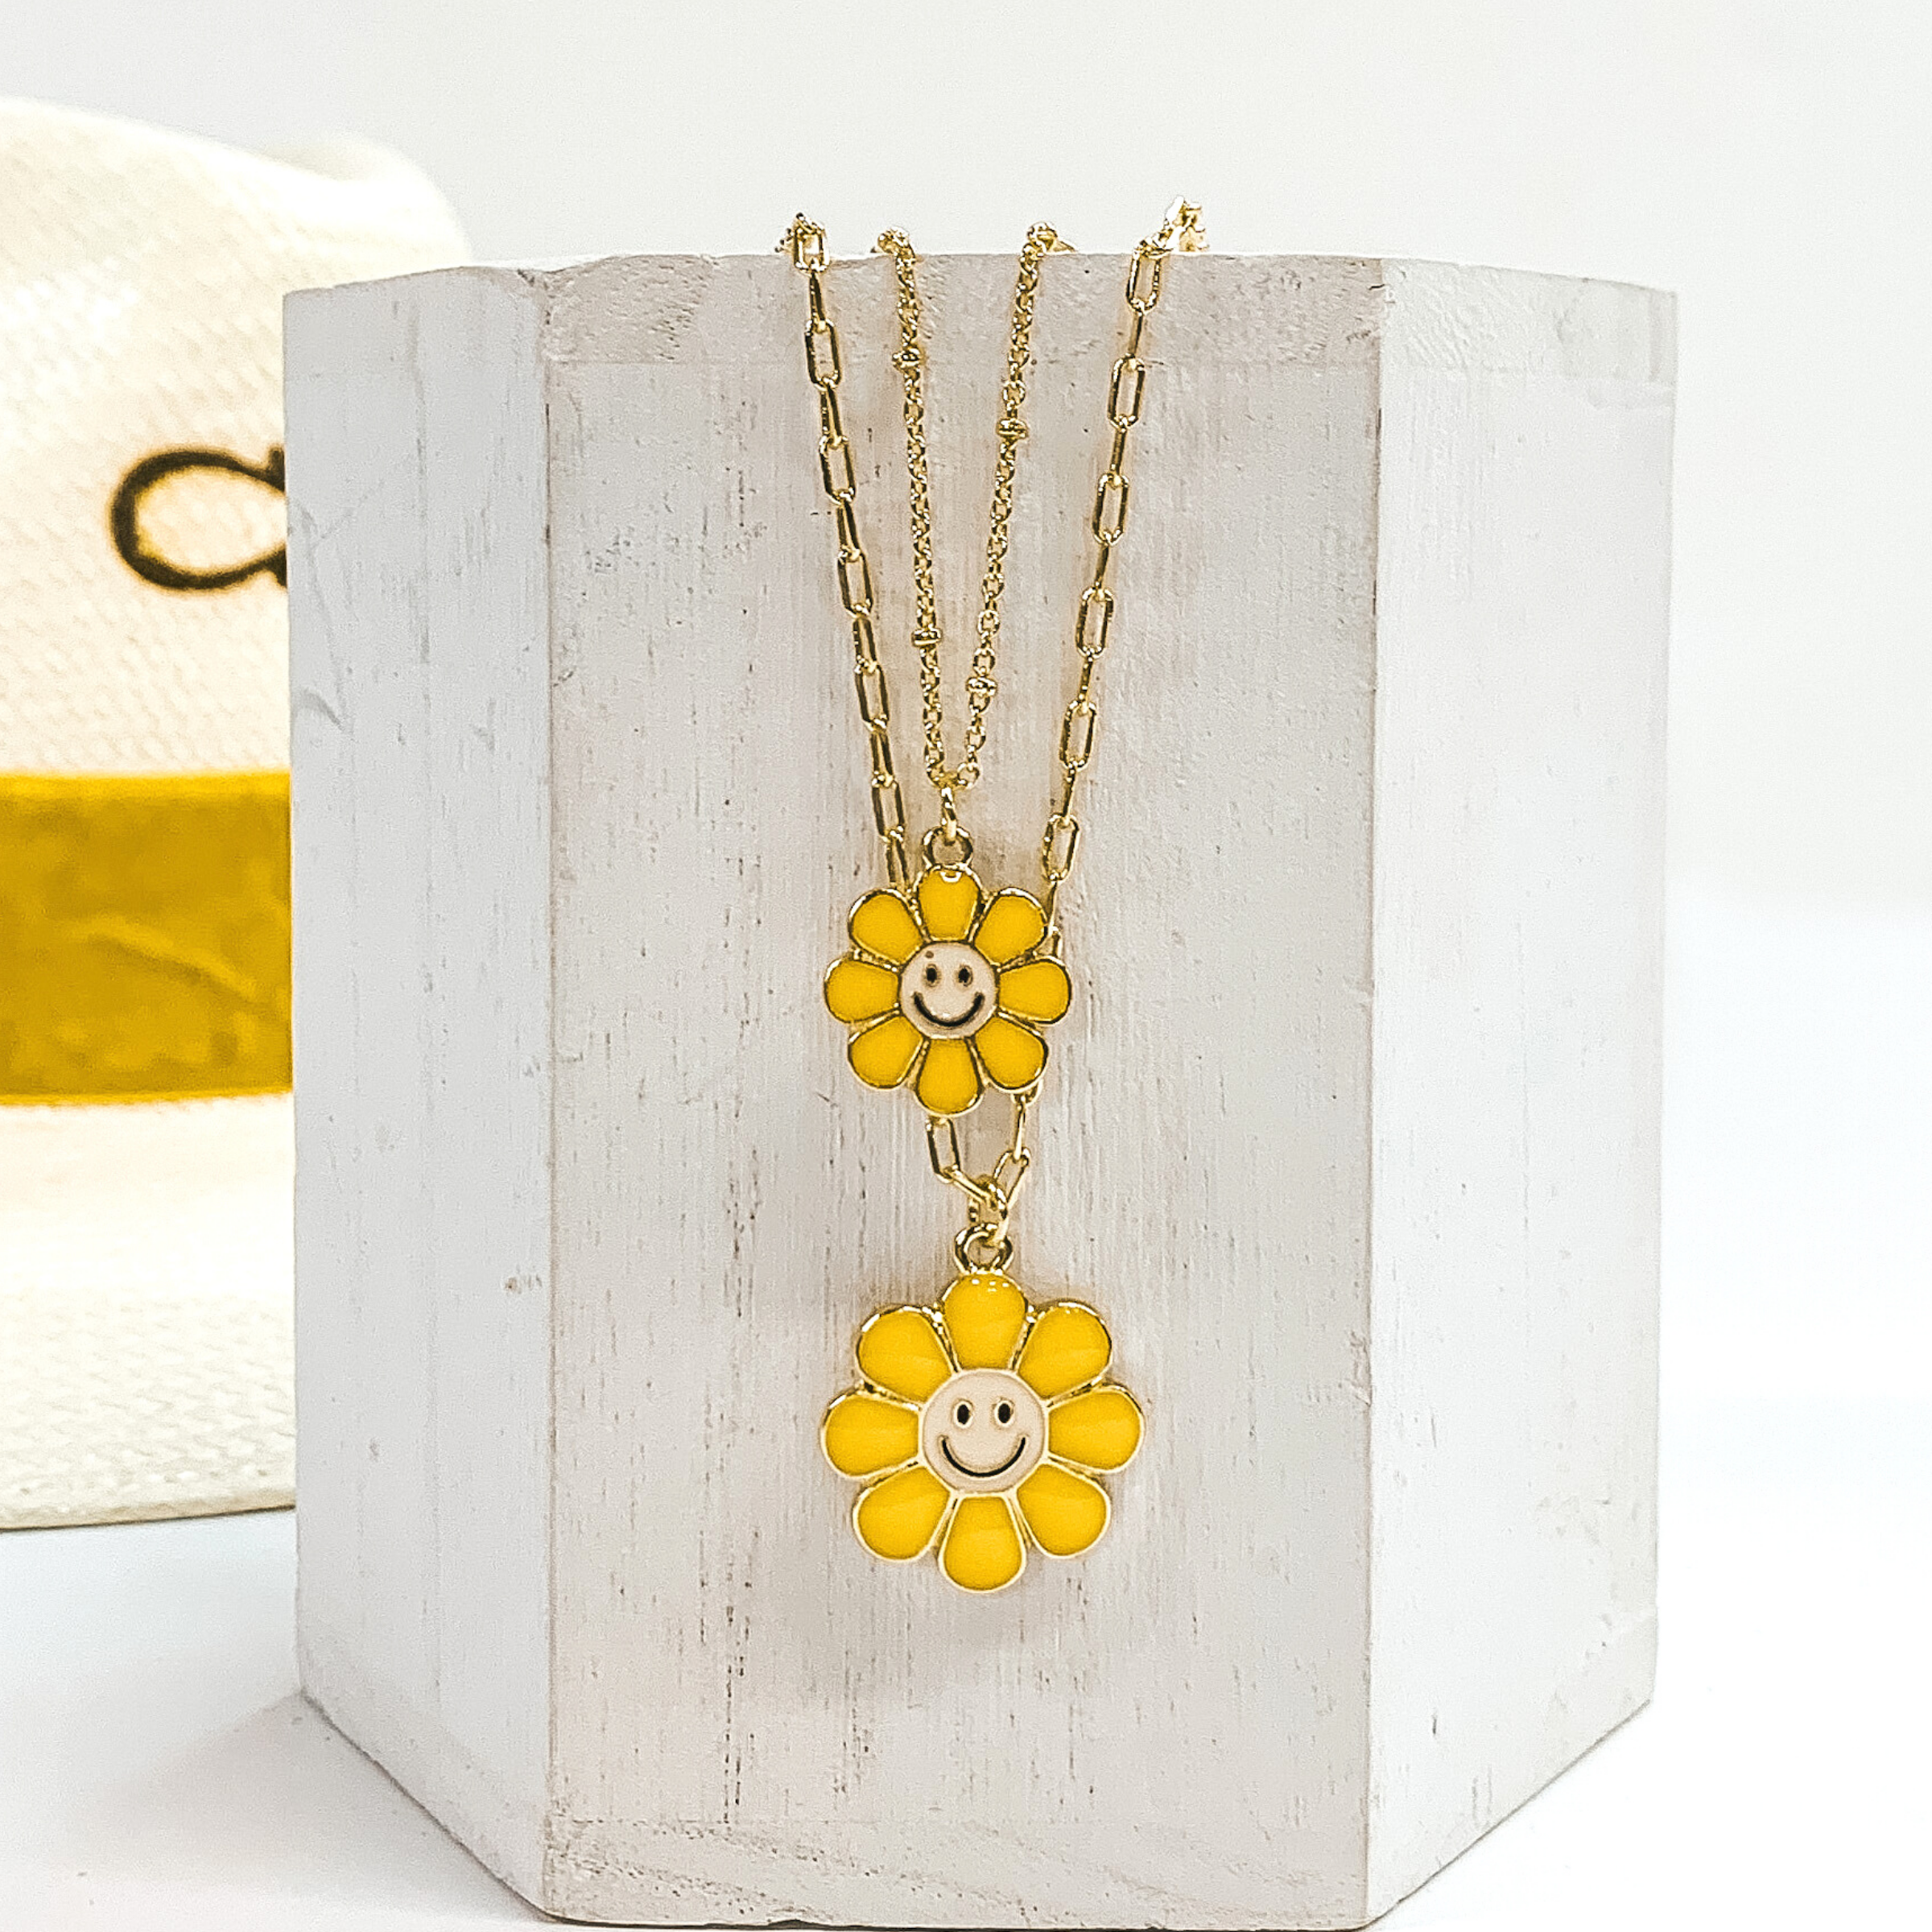 Gold double chained necklace. One strand has a yellow flower pendant with a white center and black smiley face. The other strand is longer and has a slightly bigger yellow flower pendant with a white center and black smiley face. This necklace is pictured laying on a white block on a white background with a straw hat with a yellow band in the background. 